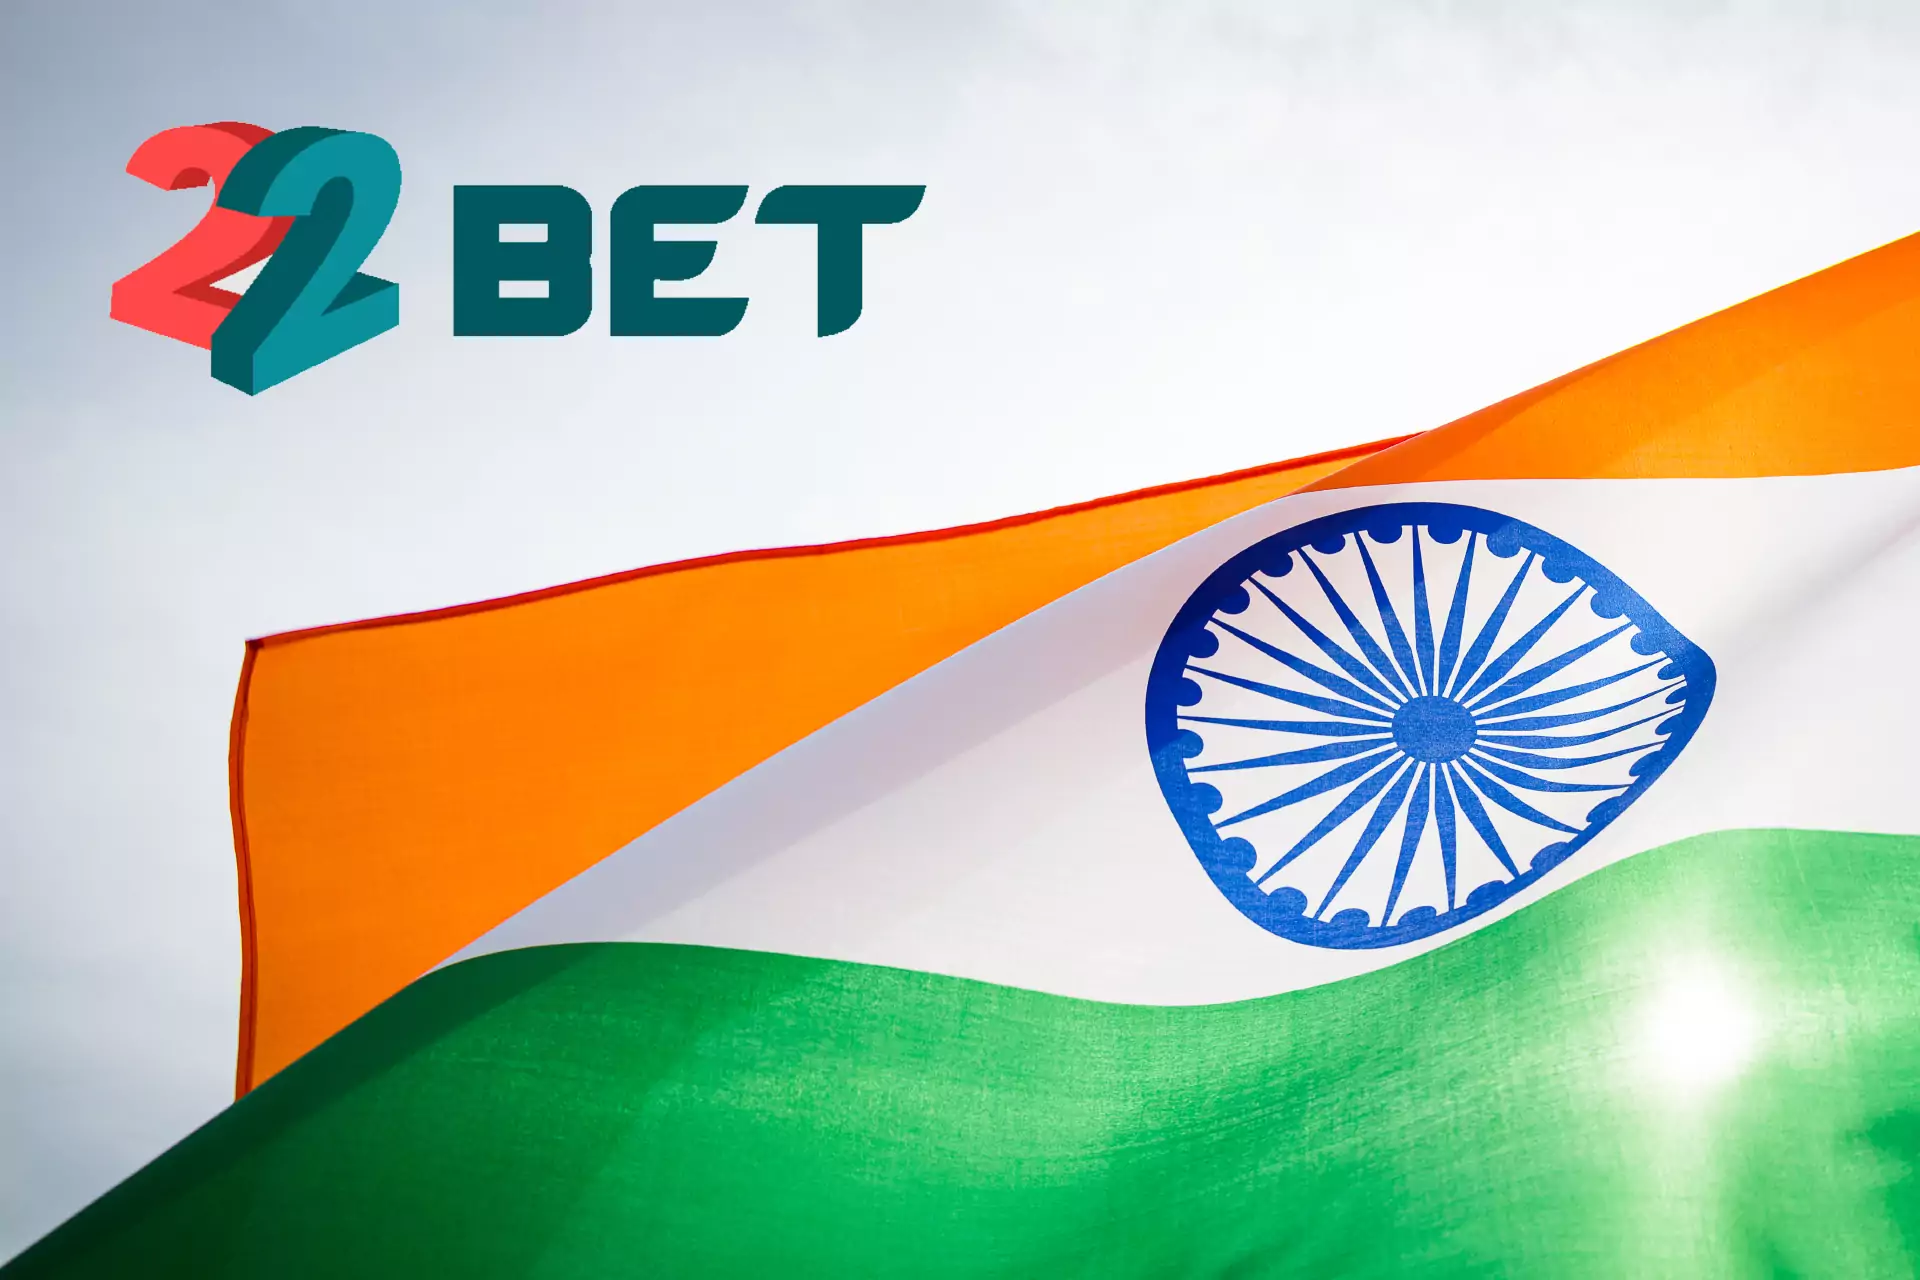 Betting on 22 bet is legal and safe for Indian users.